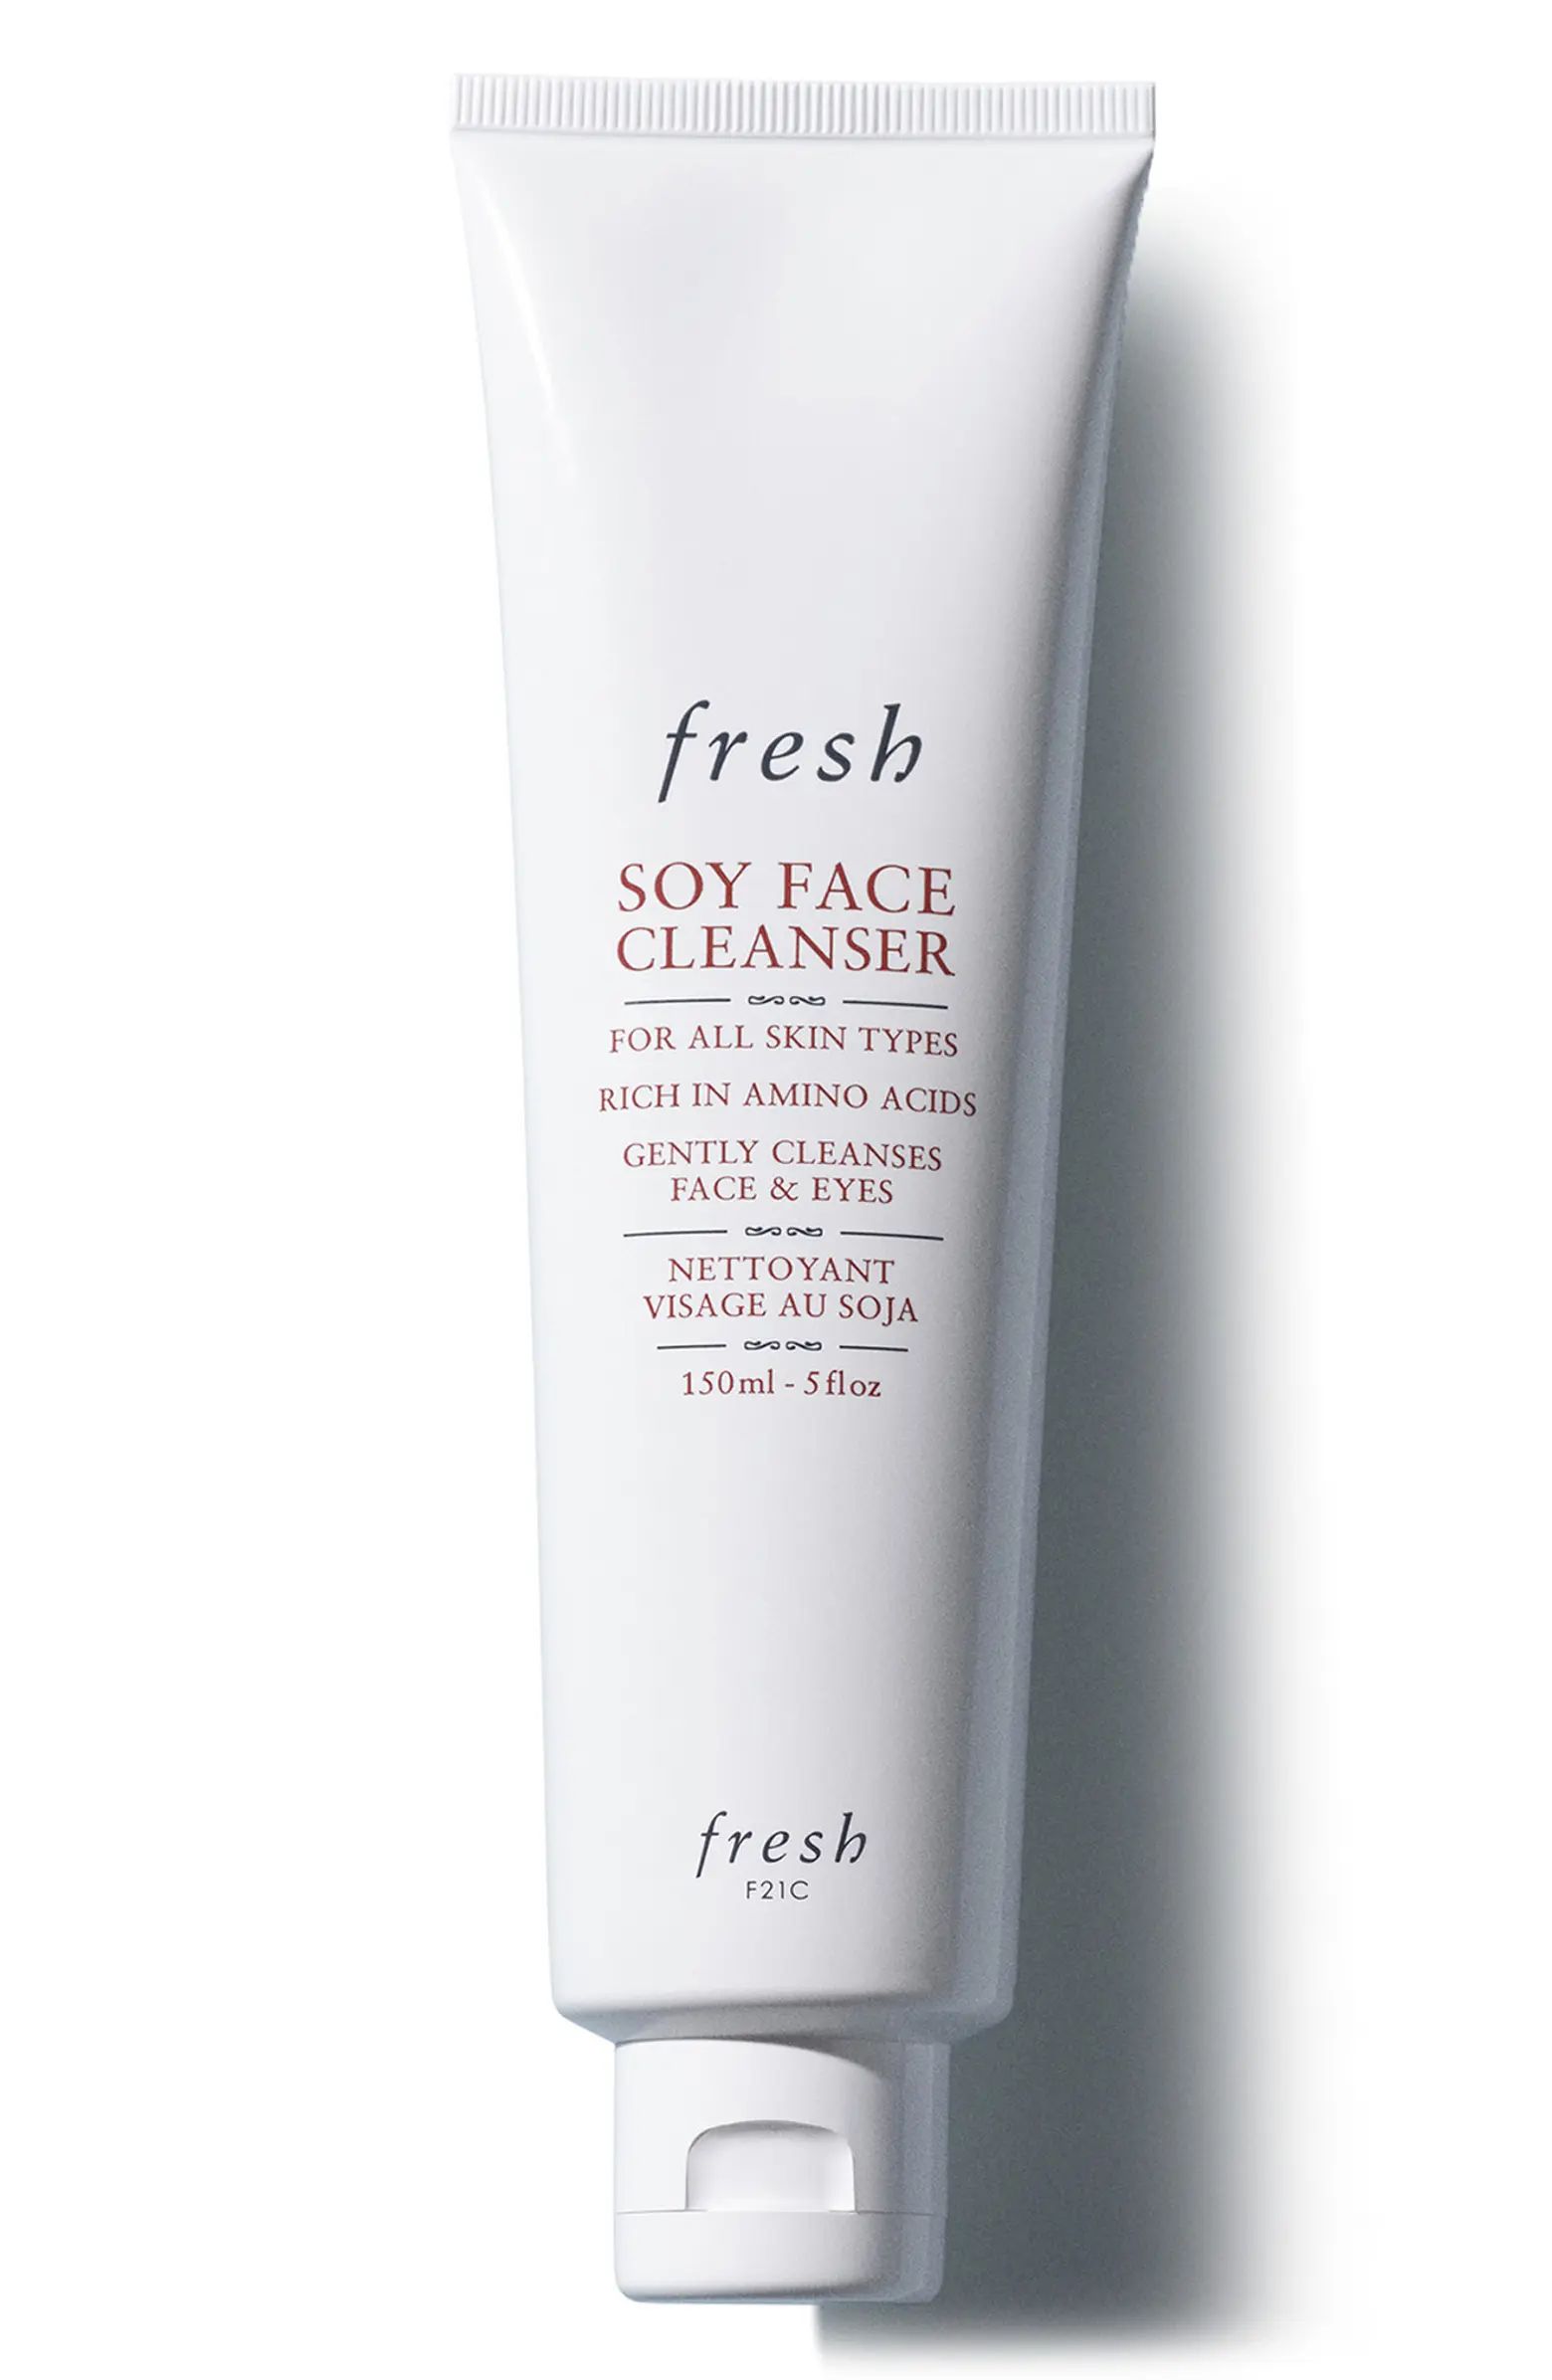 Soy Face Cleanser Makeup Removing Face Wash | Nordstrom